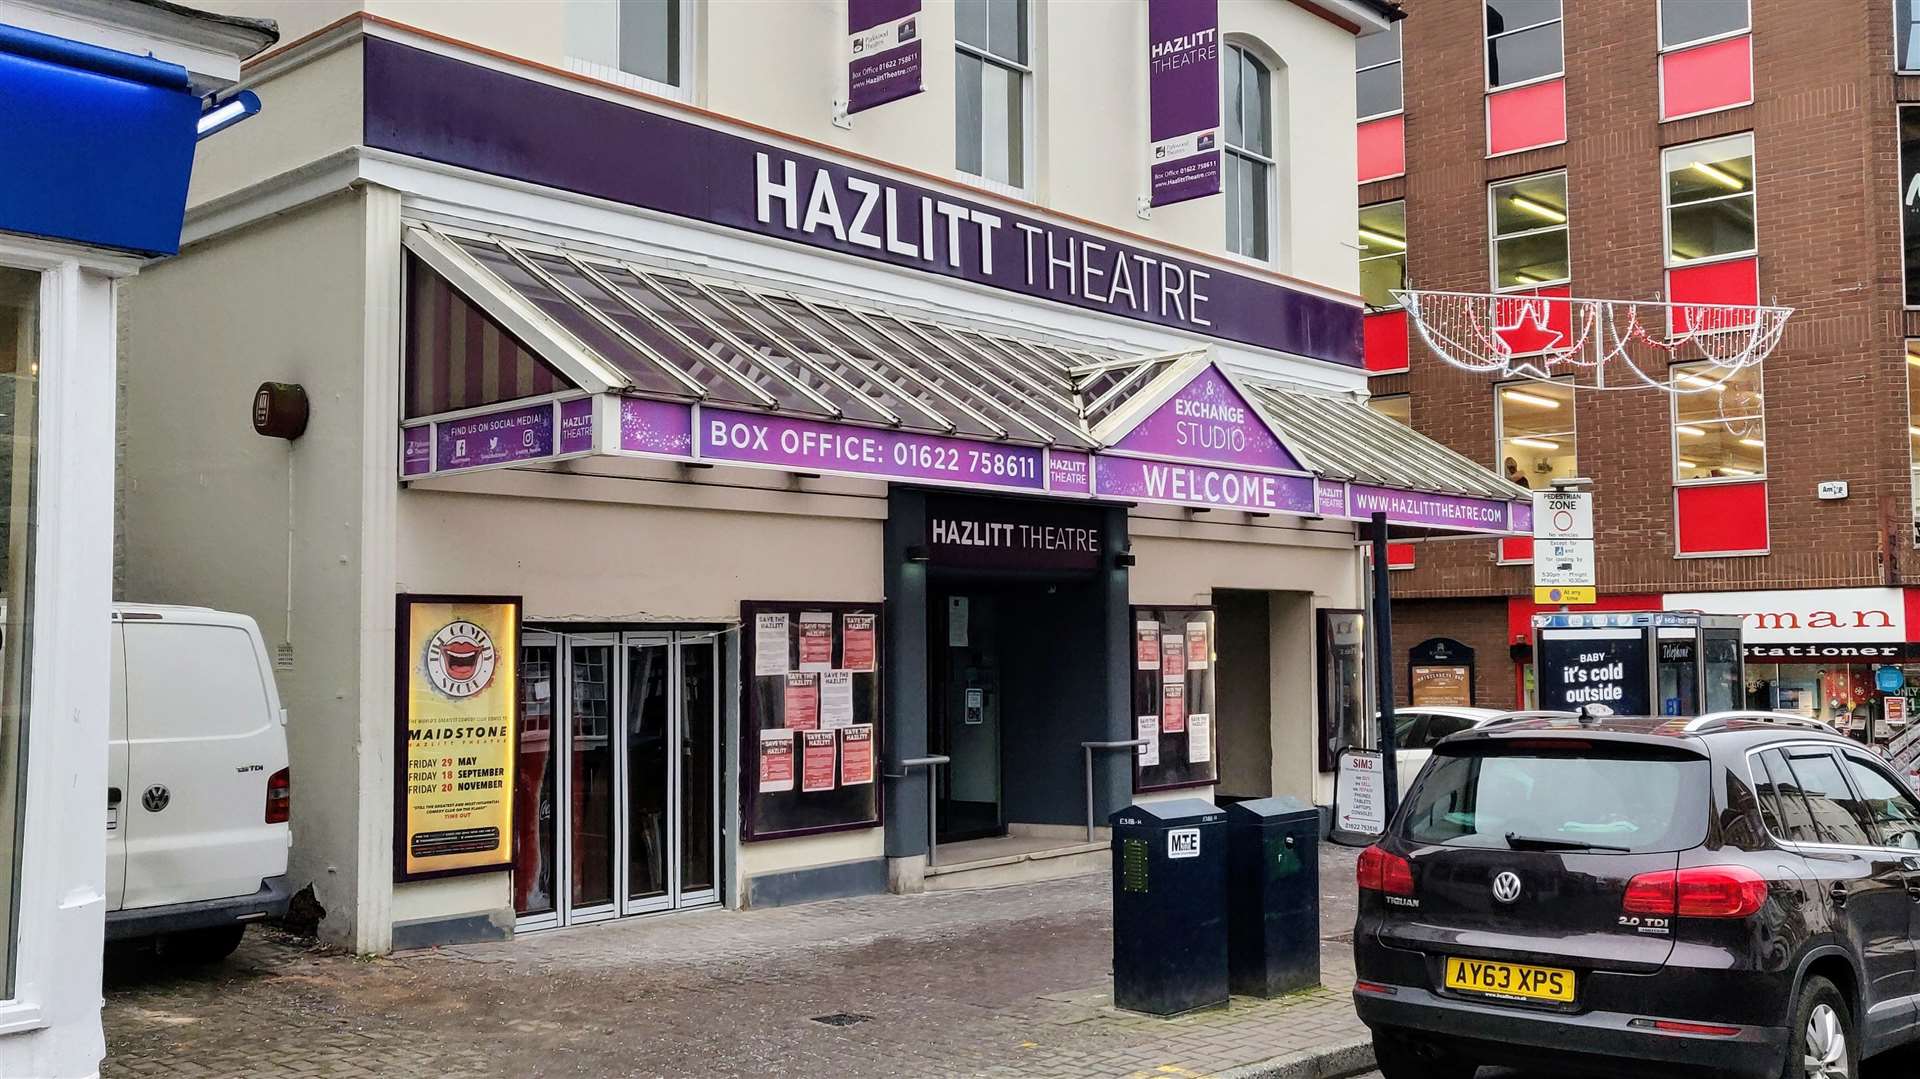 The Hazlitt Theatre in Maidstone has had to cancel some of its shows today